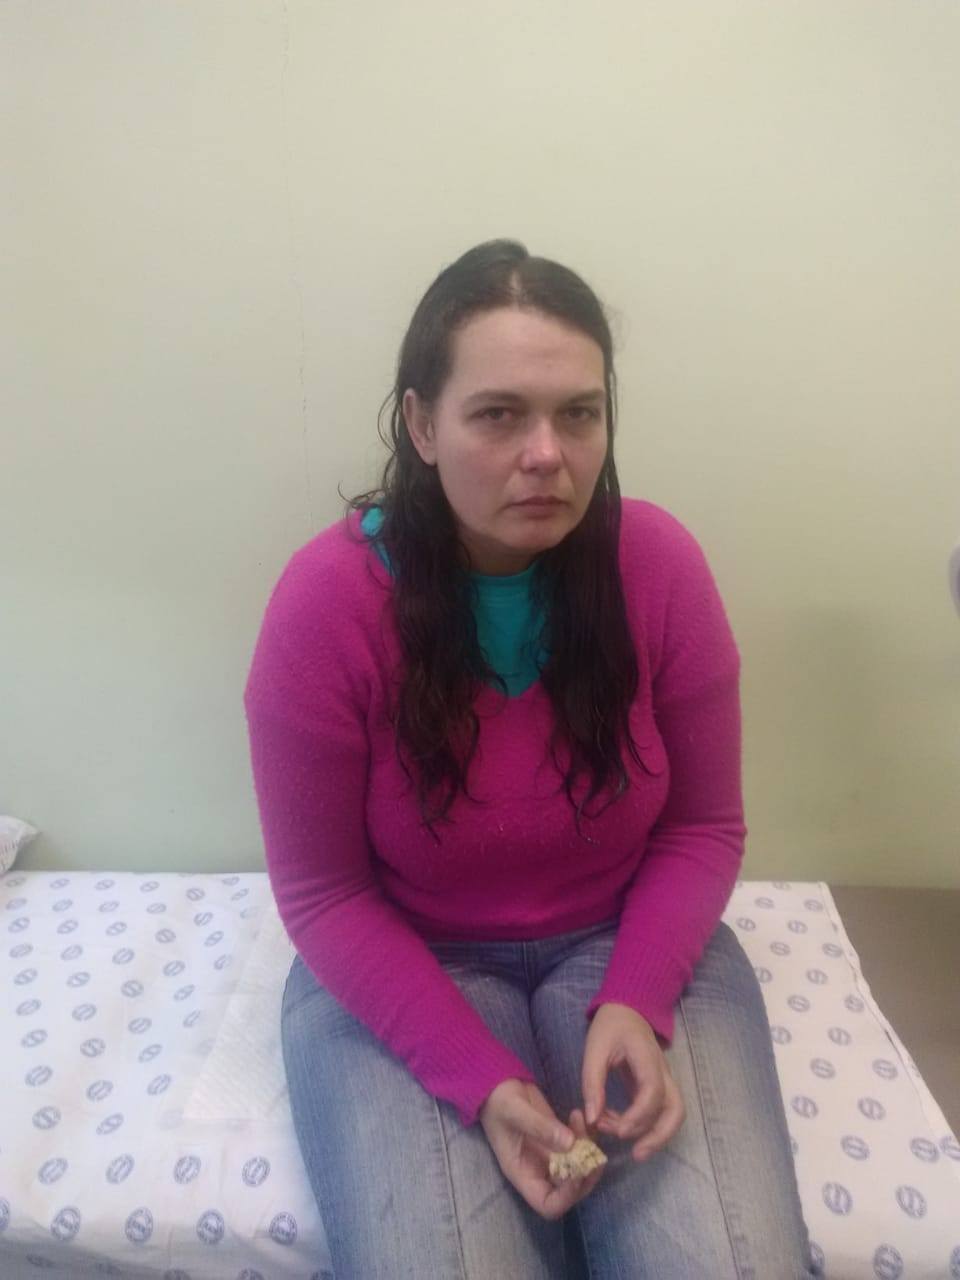 Assistance sought to identify an unknown found female